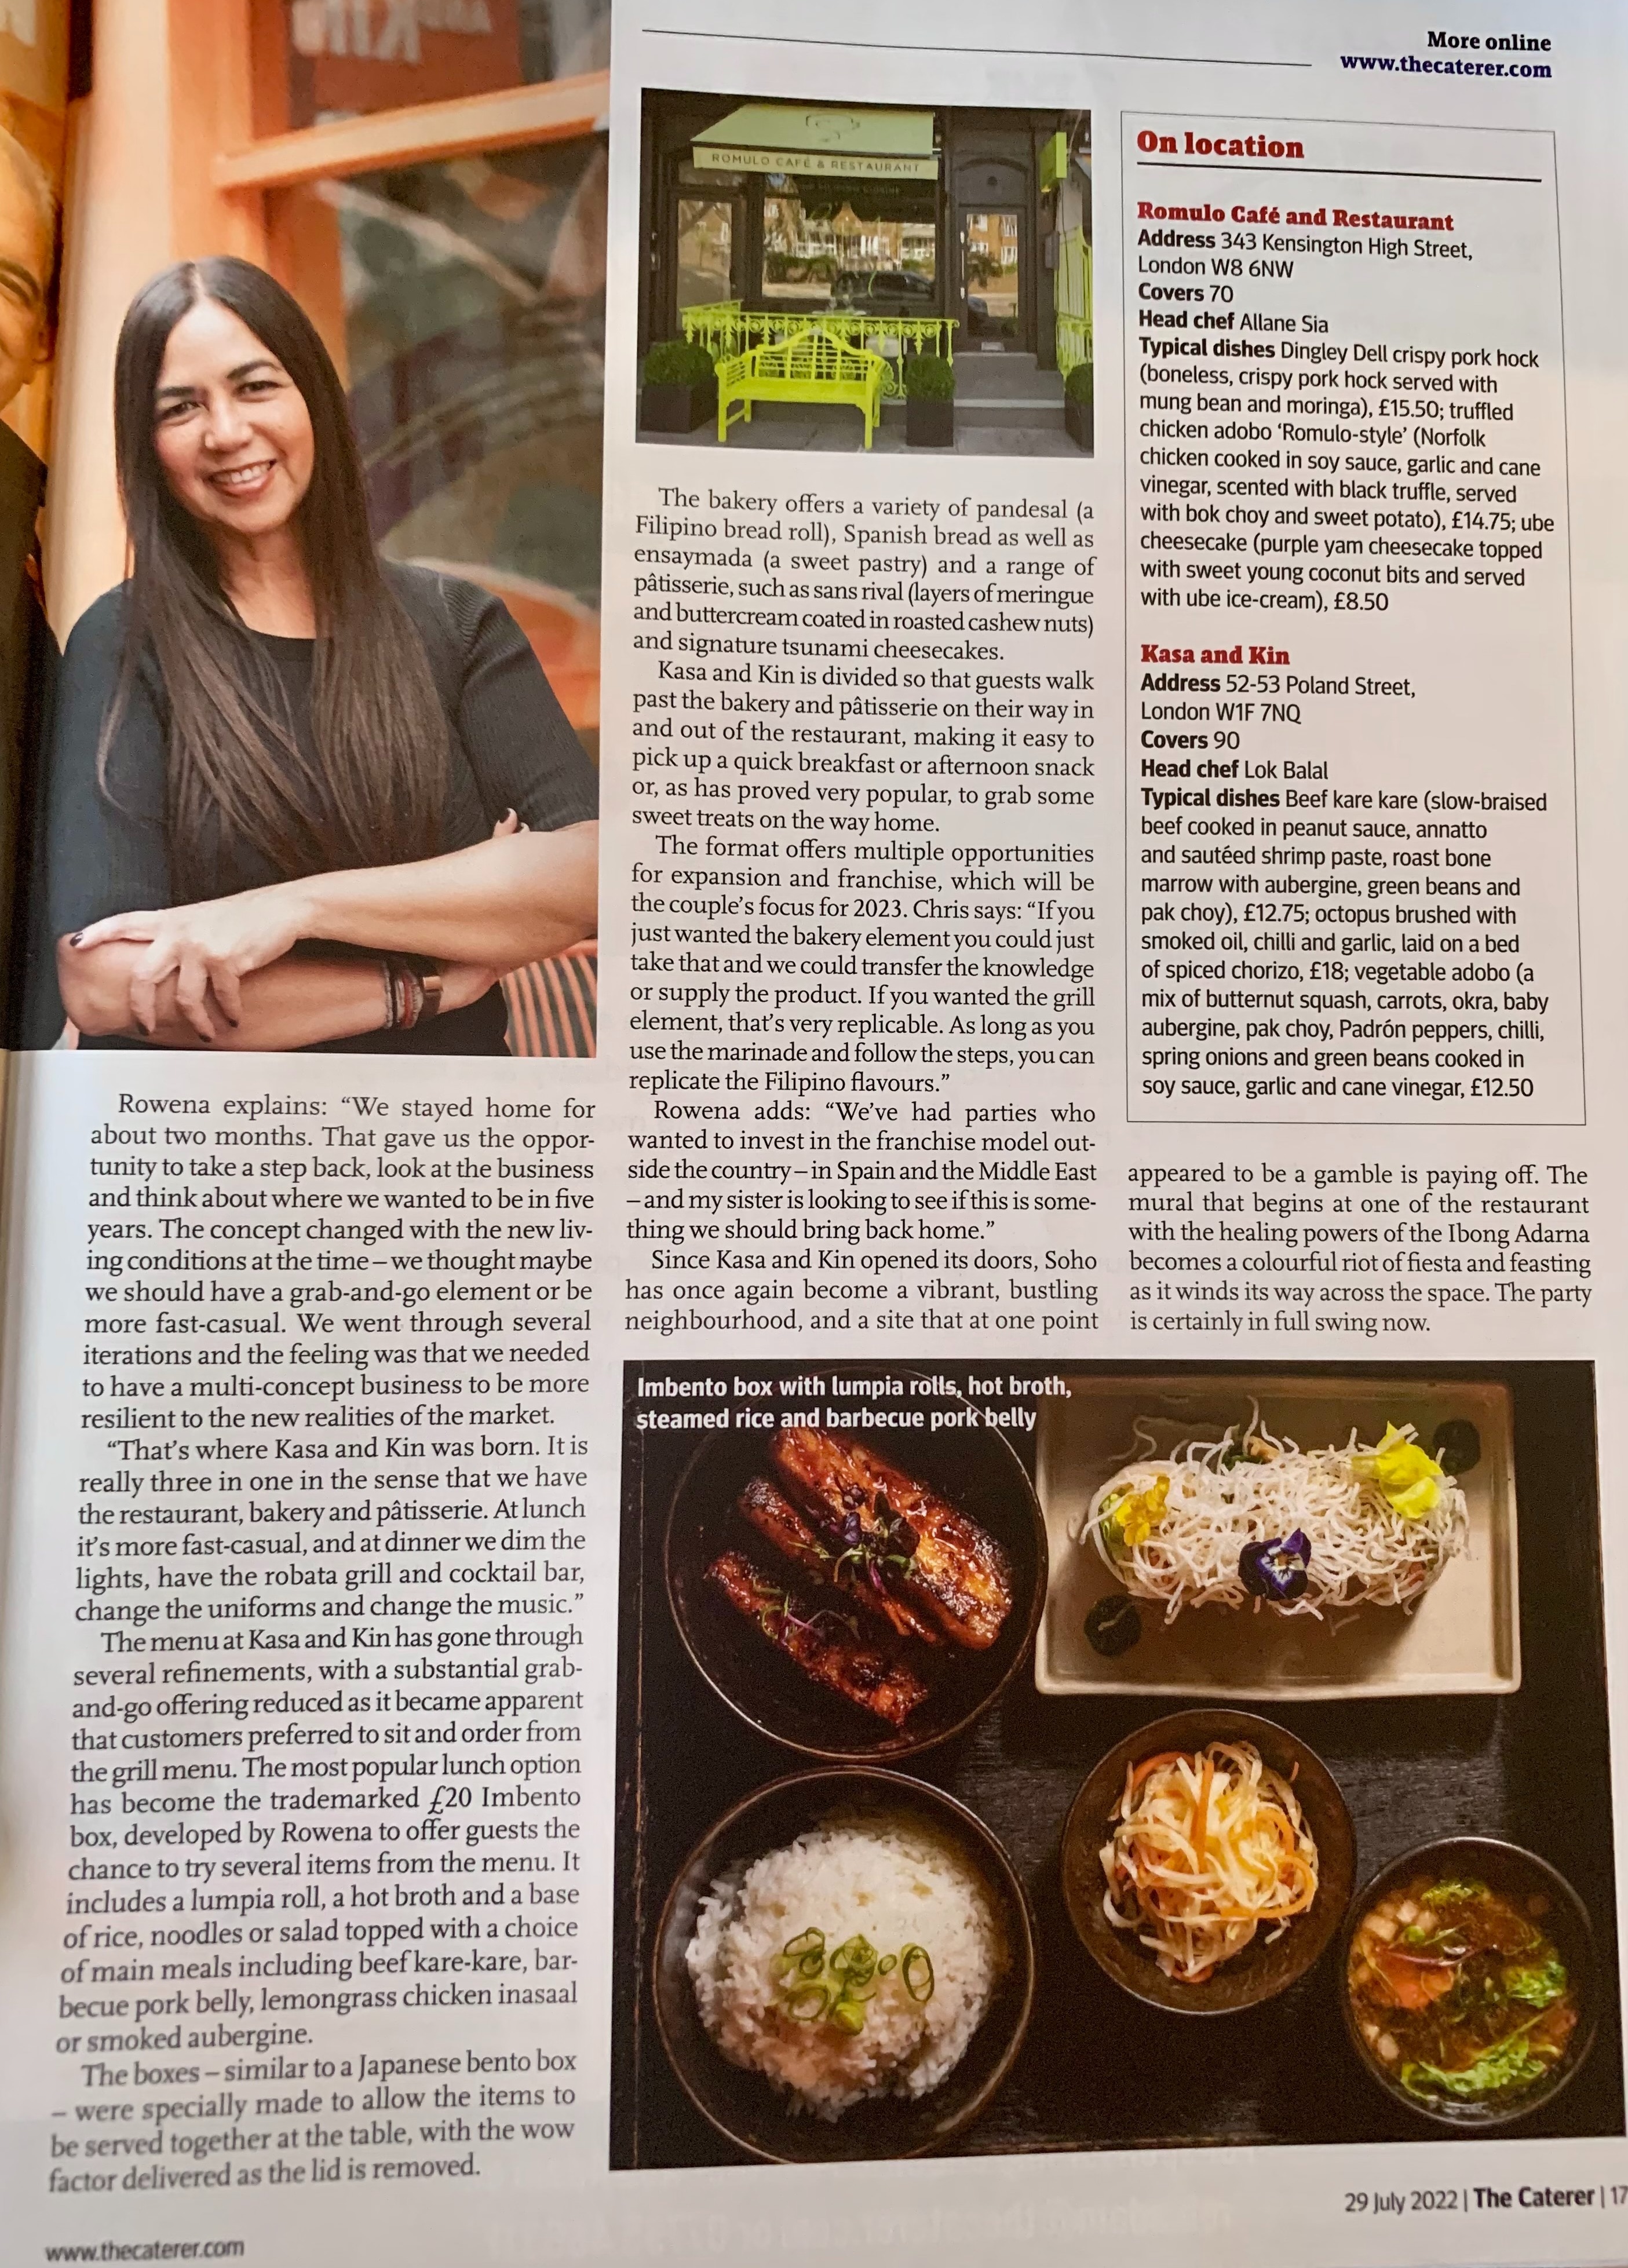 The Caterer feature